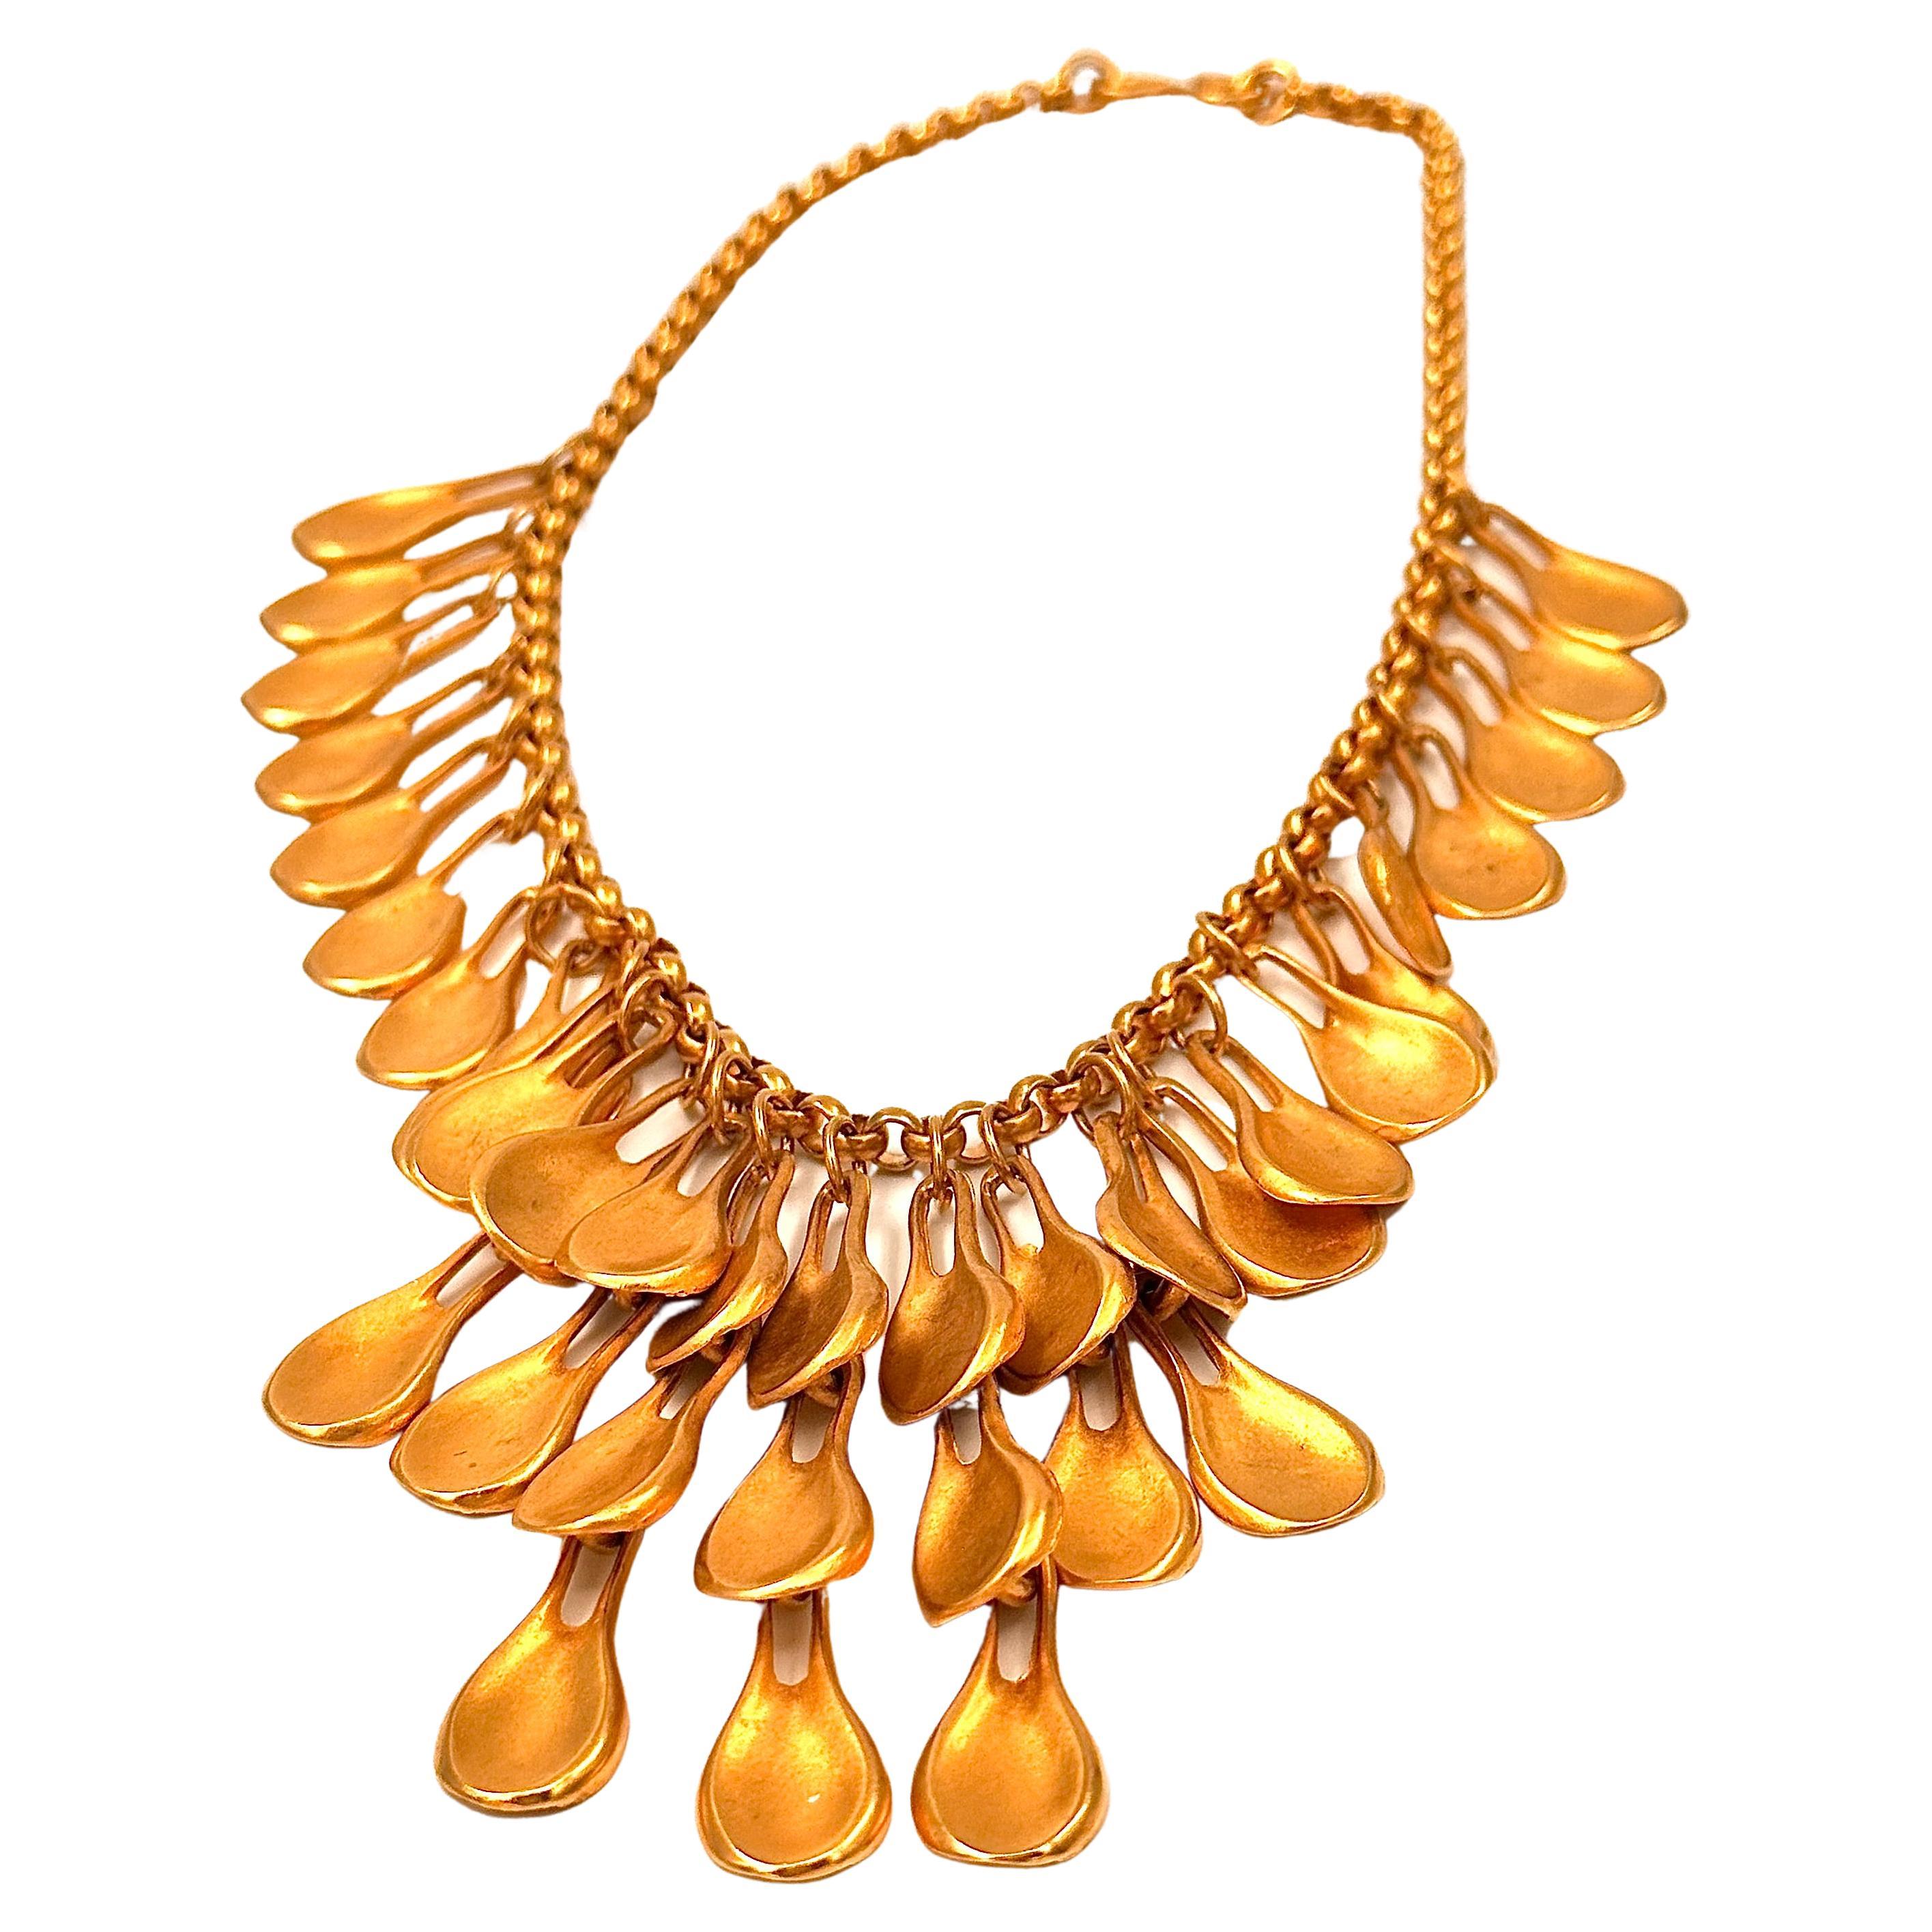 Robert Lee Morris Gold Plated Raindrop Bib Necklace 1989, an iconic Bold Gold necklace from the era of the 80's big jewelry trend. Even though this is not a big huge necklace like many that were runway pieces in the 80's, this is a pared down